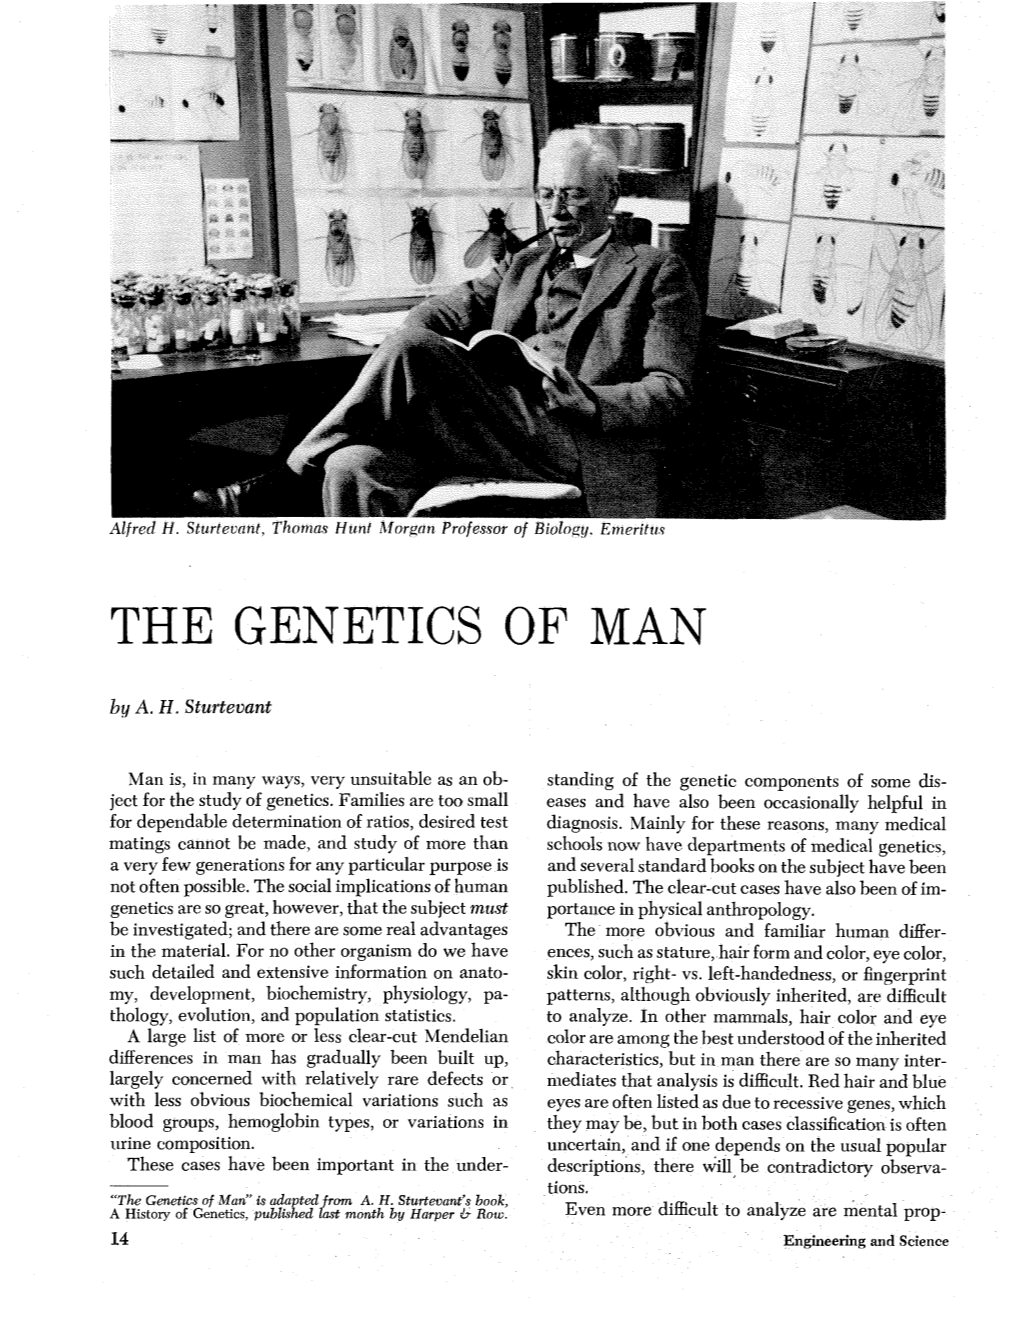 GENETIC of MAN by A